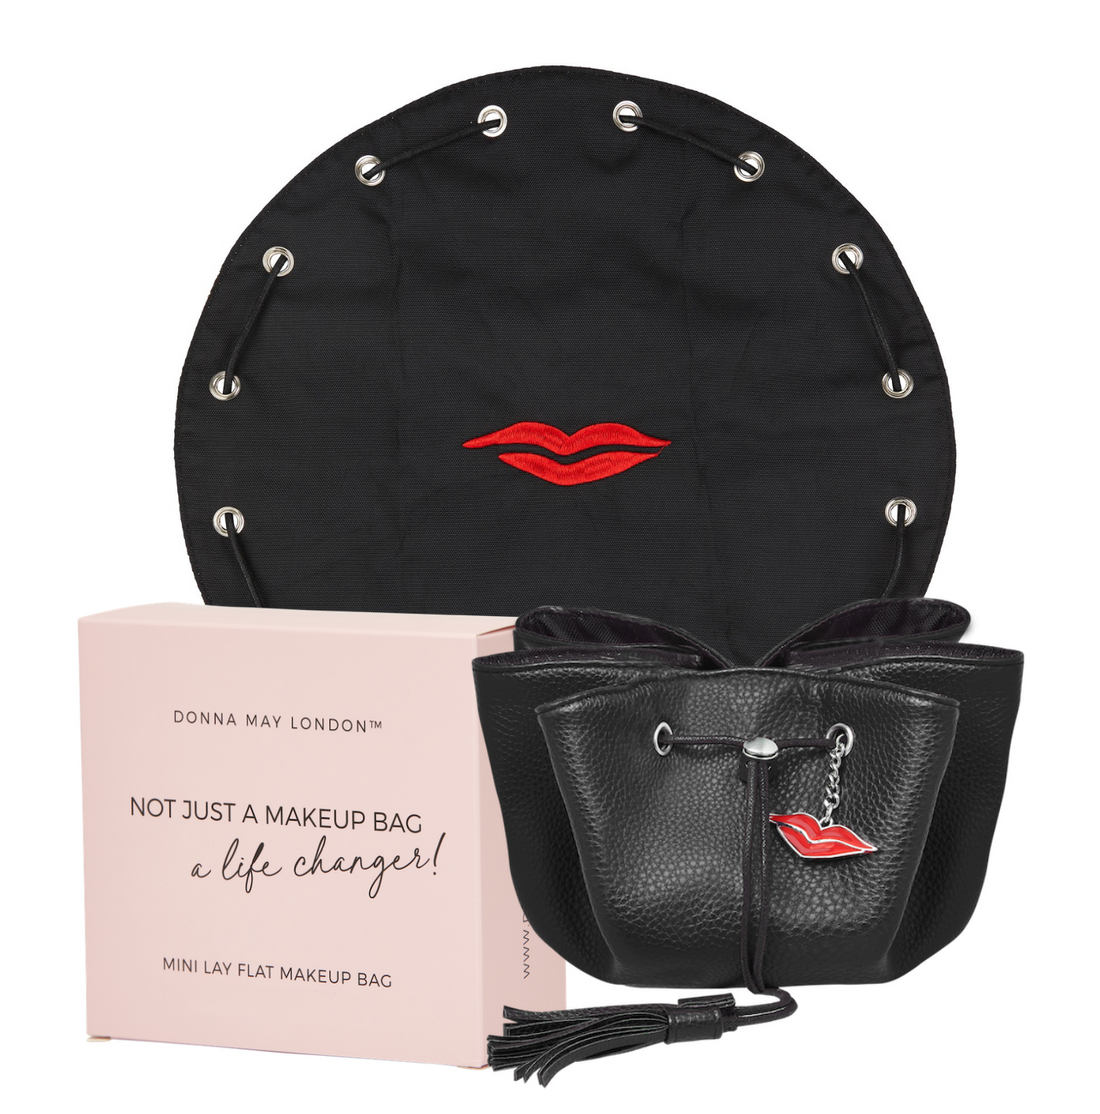 Mini Faux Leather Makeup Bag in Black